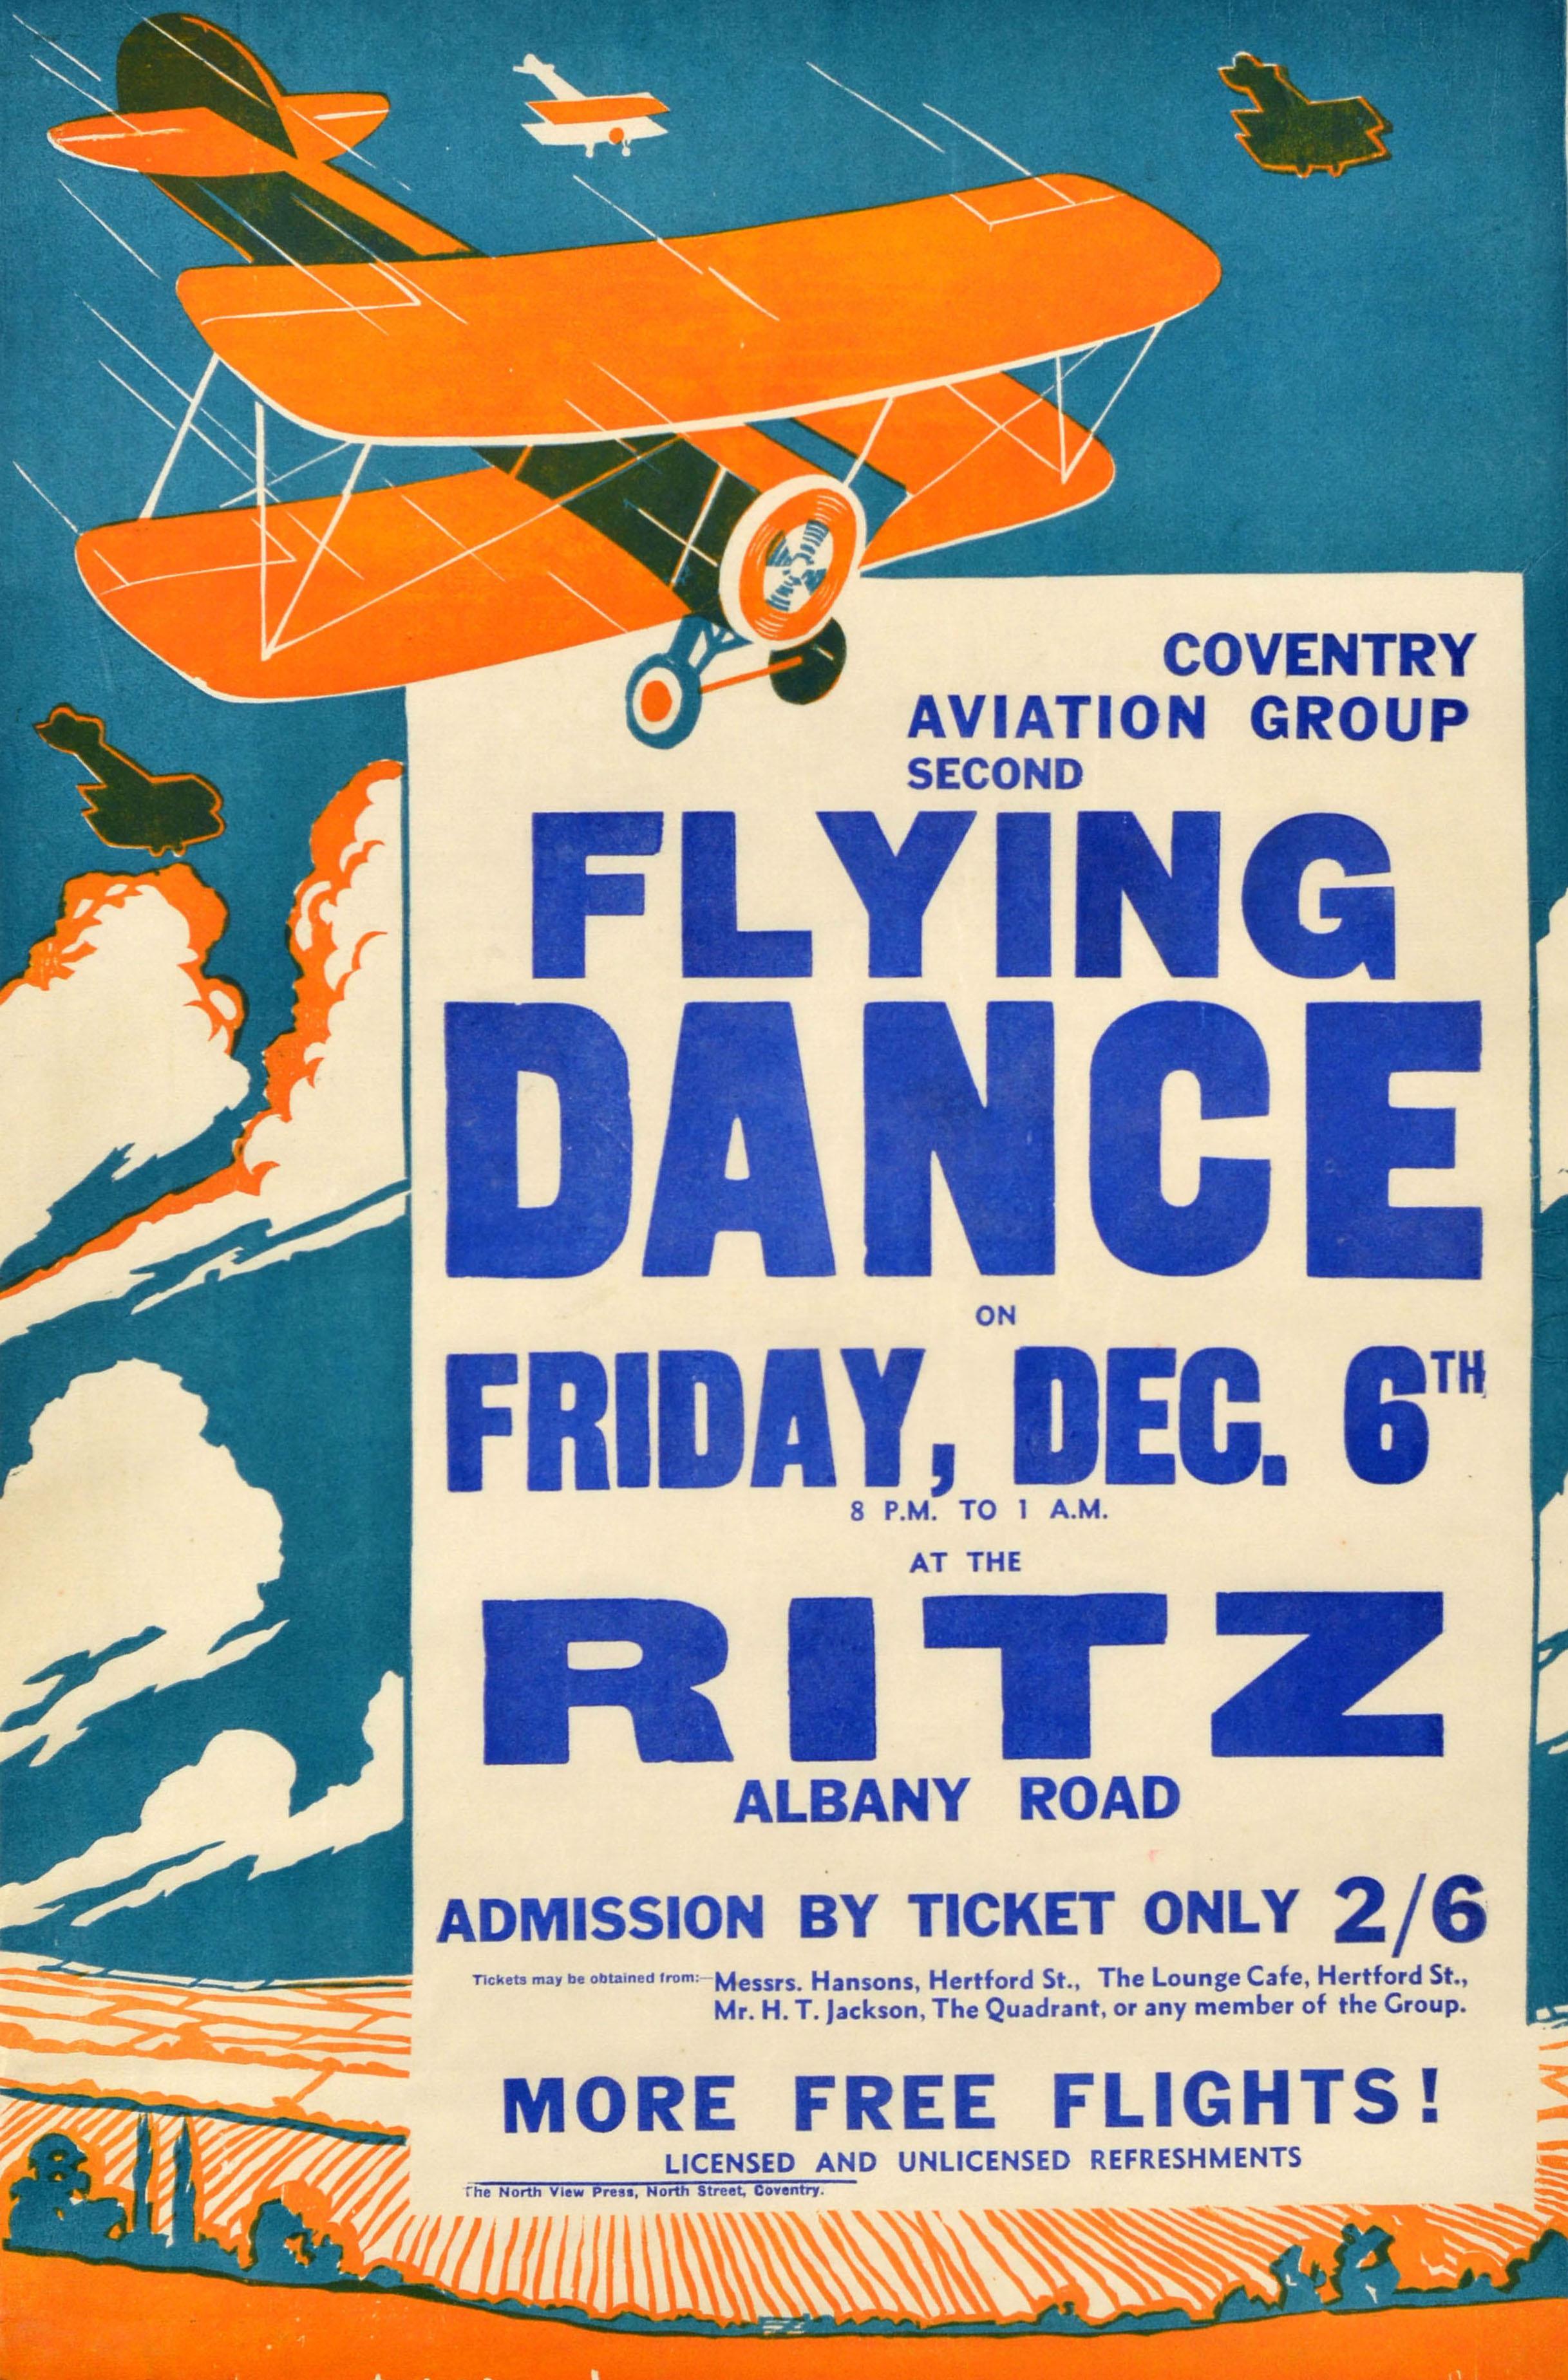 Original Vintage Advertising Poster Flying Dance Coventry Aviation Group Plane - Print by Unknown